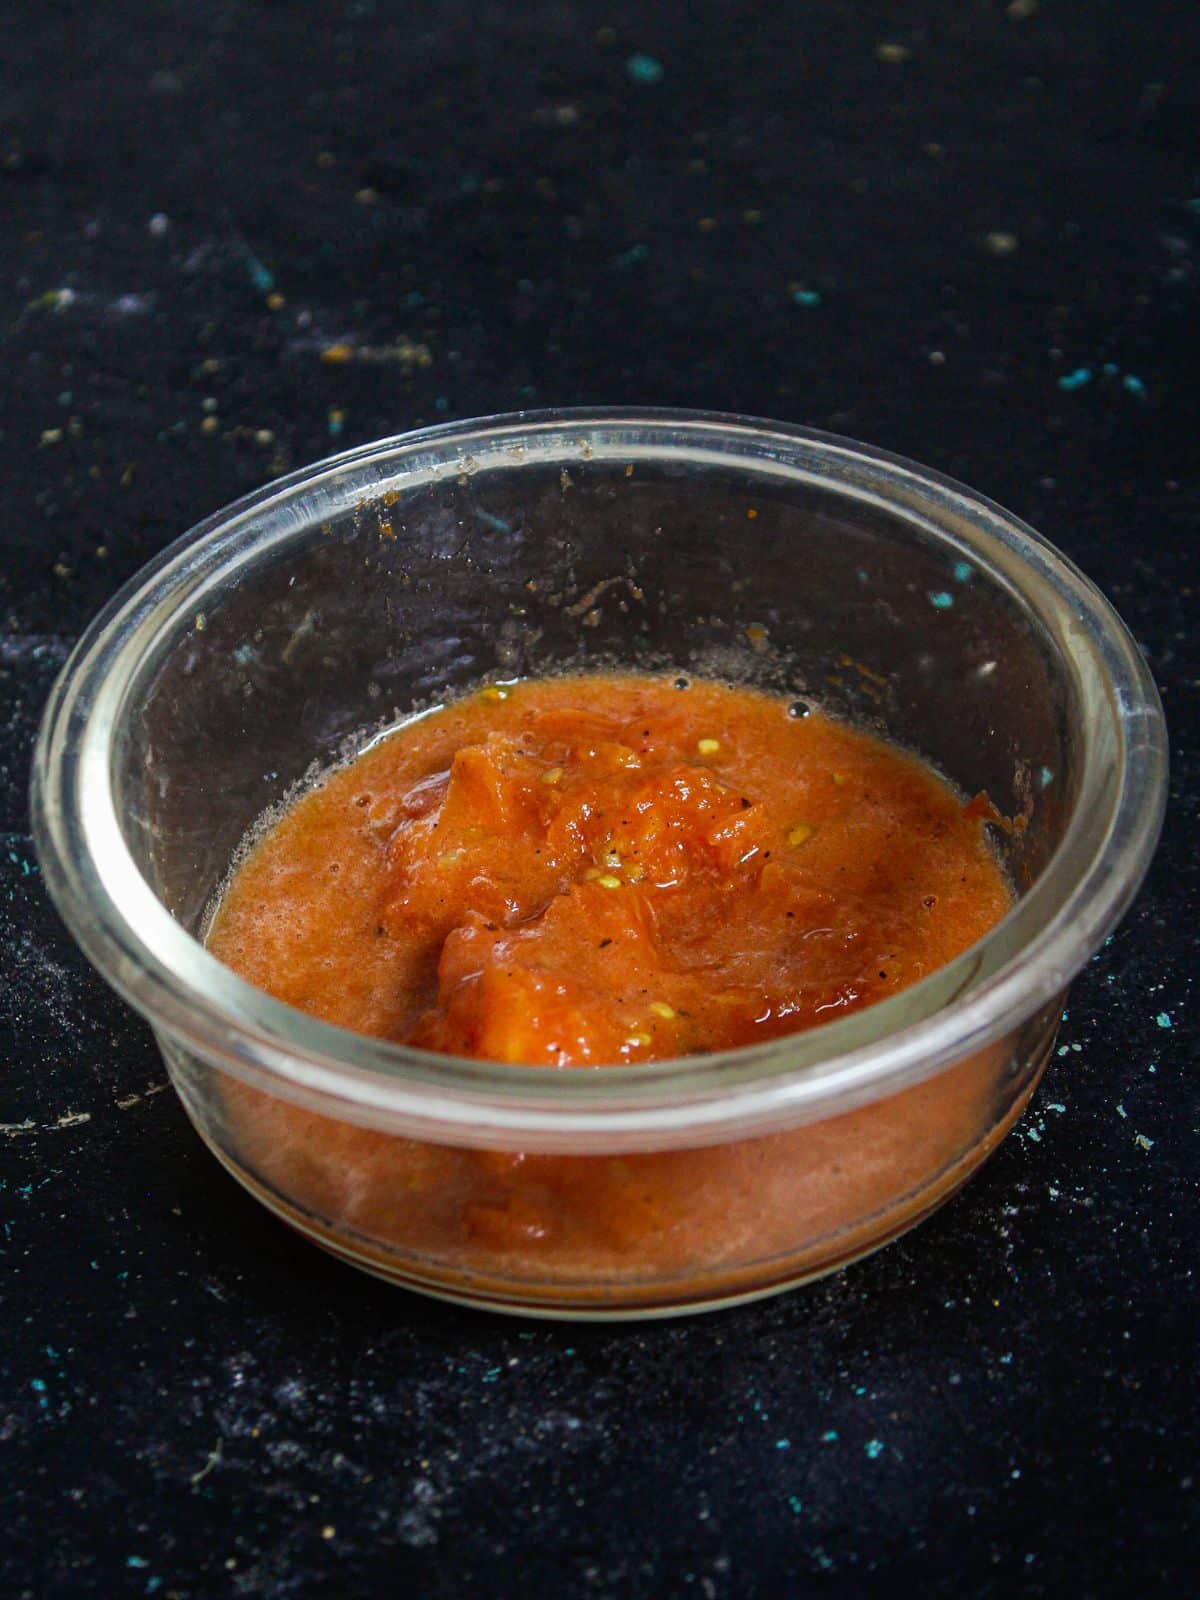 Blend the tomato and make it a thick paste 